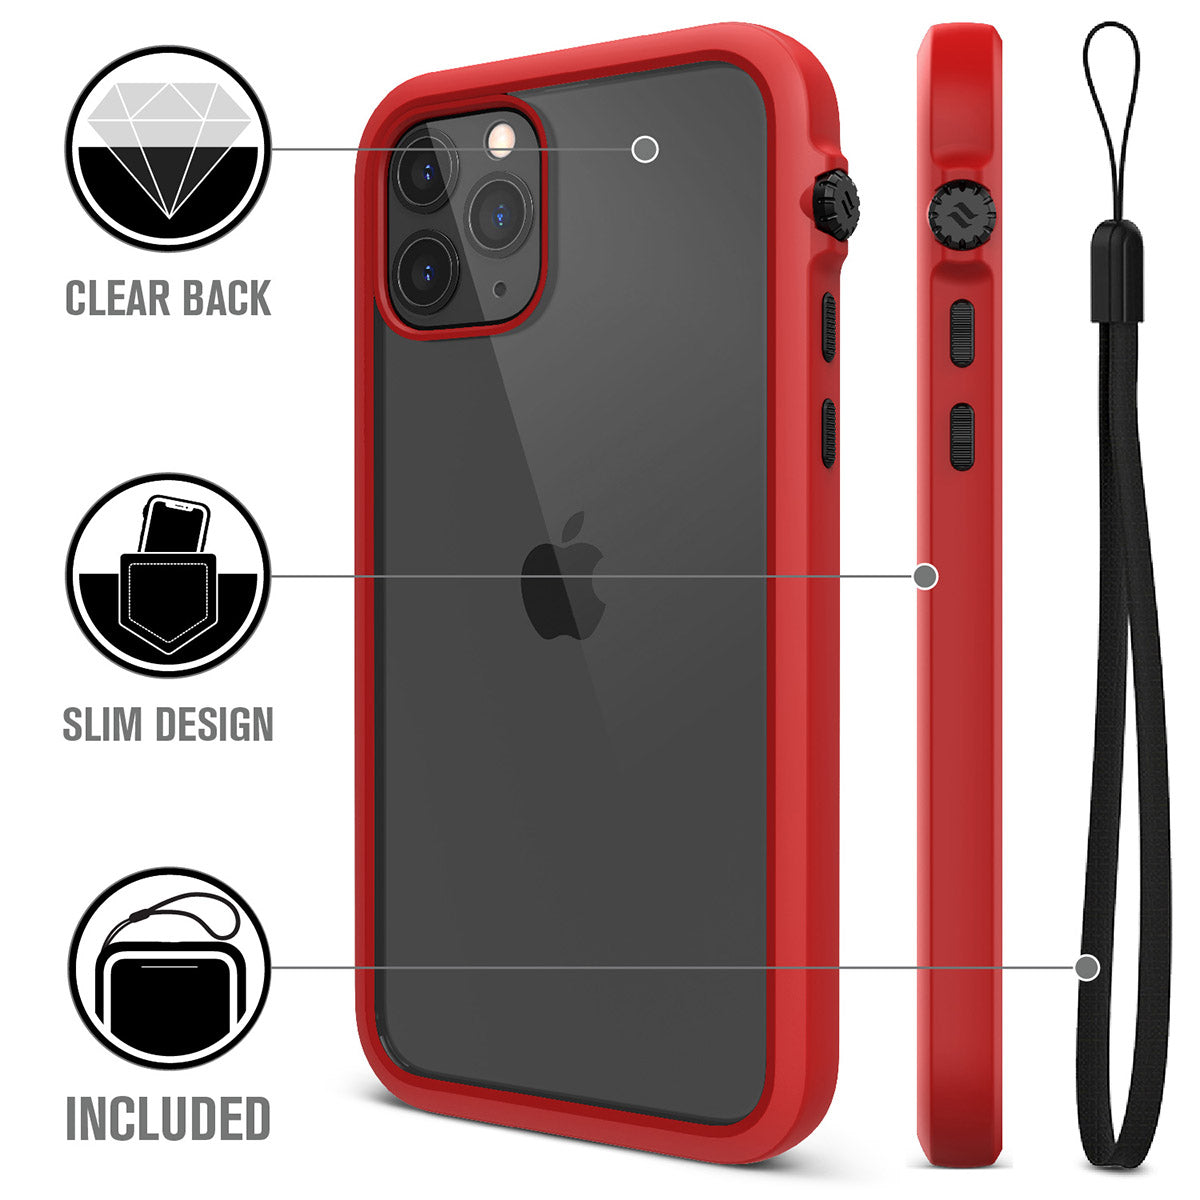 catalyst iPhone 11 series impact protection case flame red showing the back view and buttons of the case for iPhone 11 pro and a lanyard text reads clear back slim design included